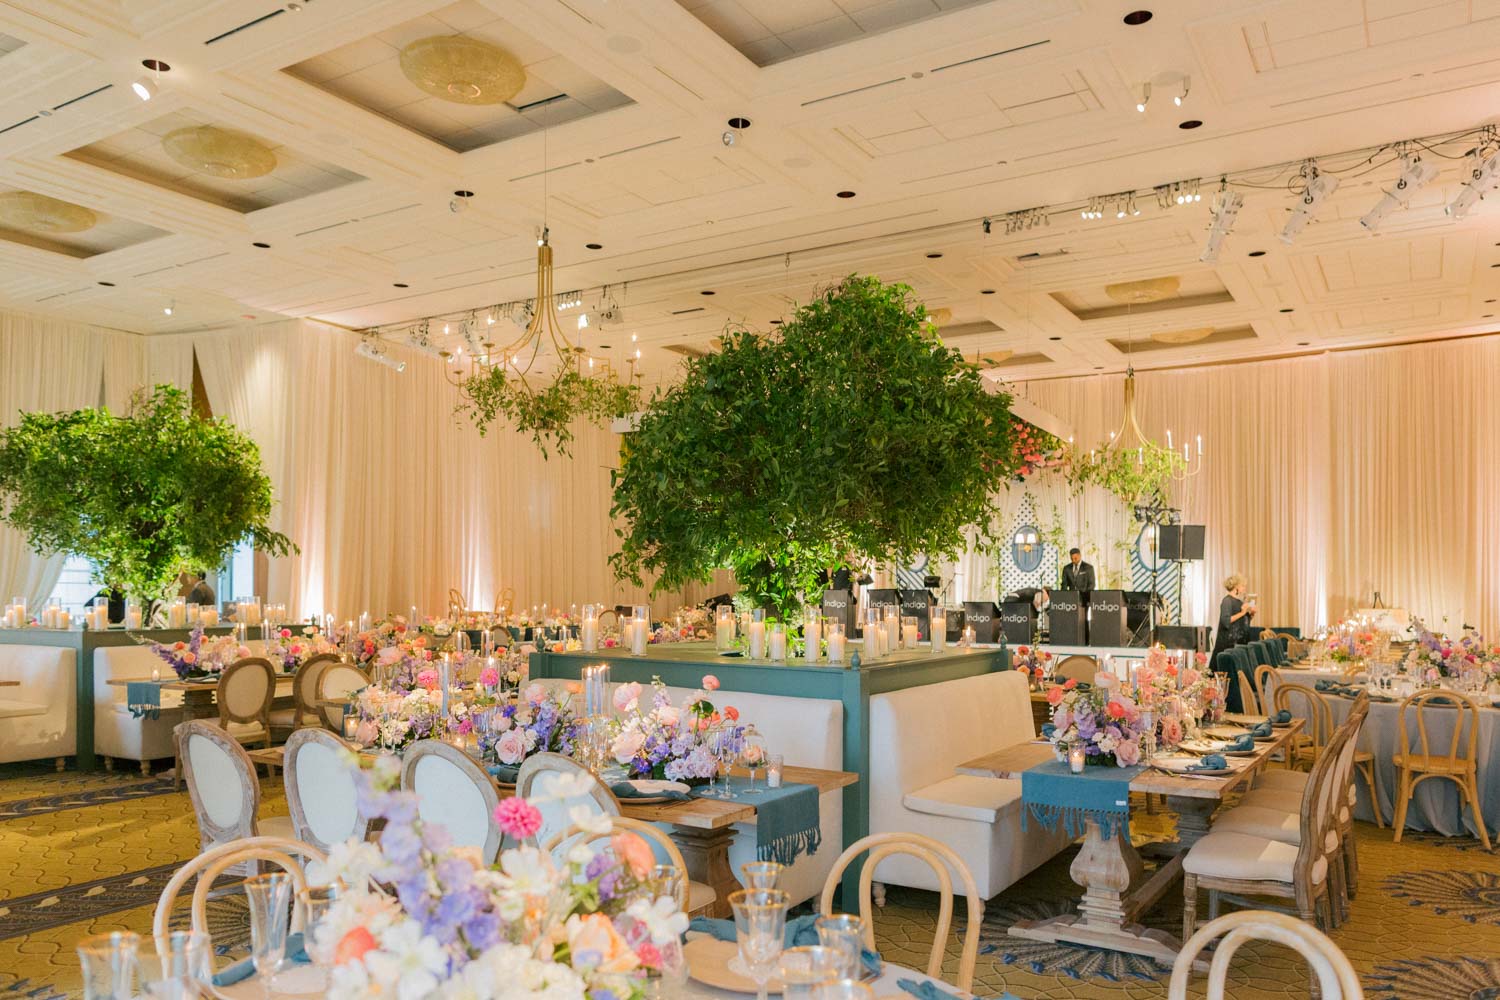 A whimsical, colorful wedding reception in Chicago.